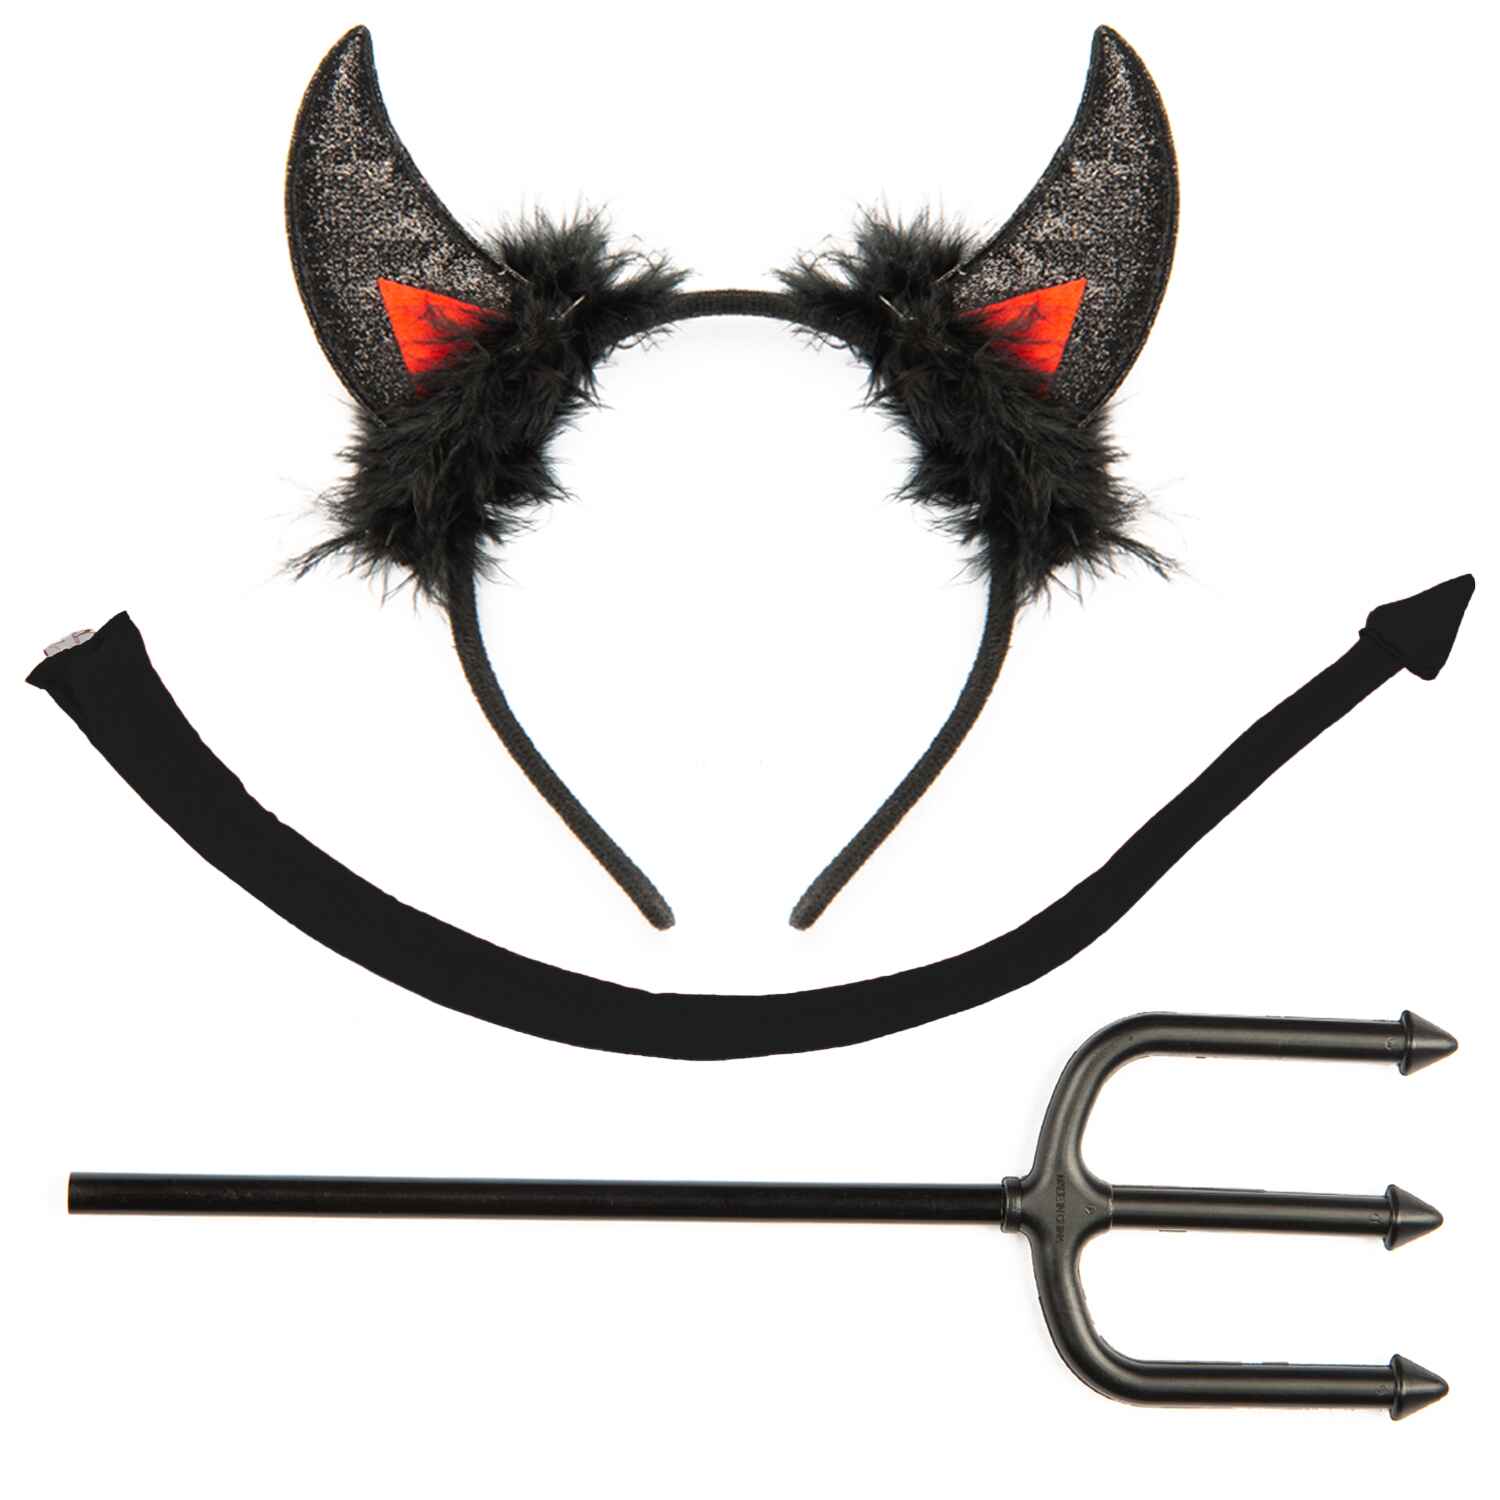  Devil Horns and Tail with Pitchfork -  Glitter Devil Ears Headband